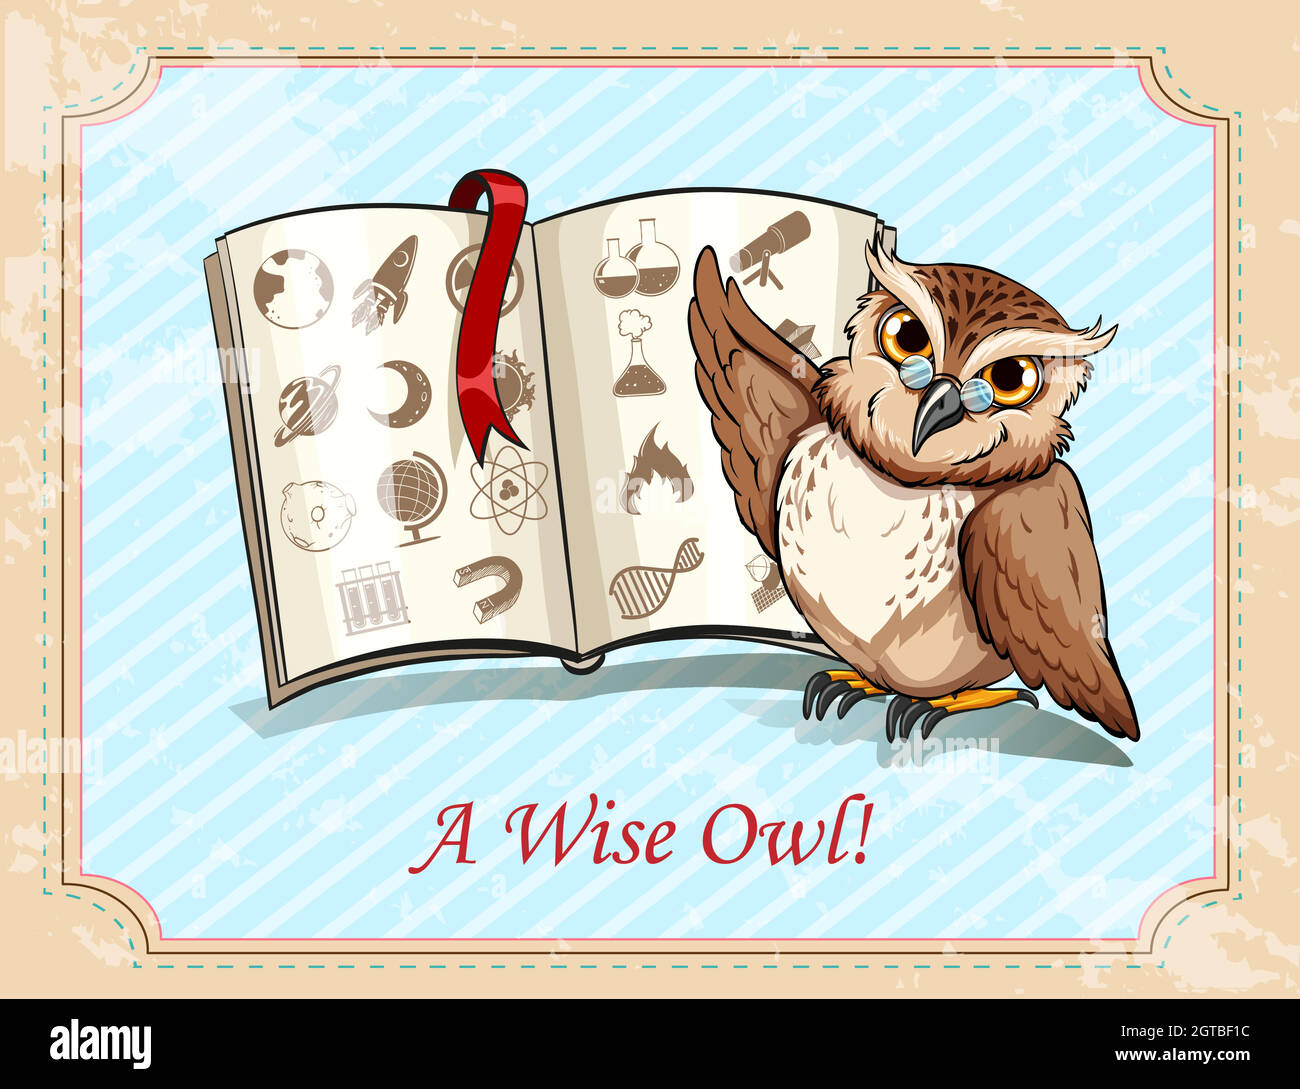 Idiom a wise owl Stock Vector